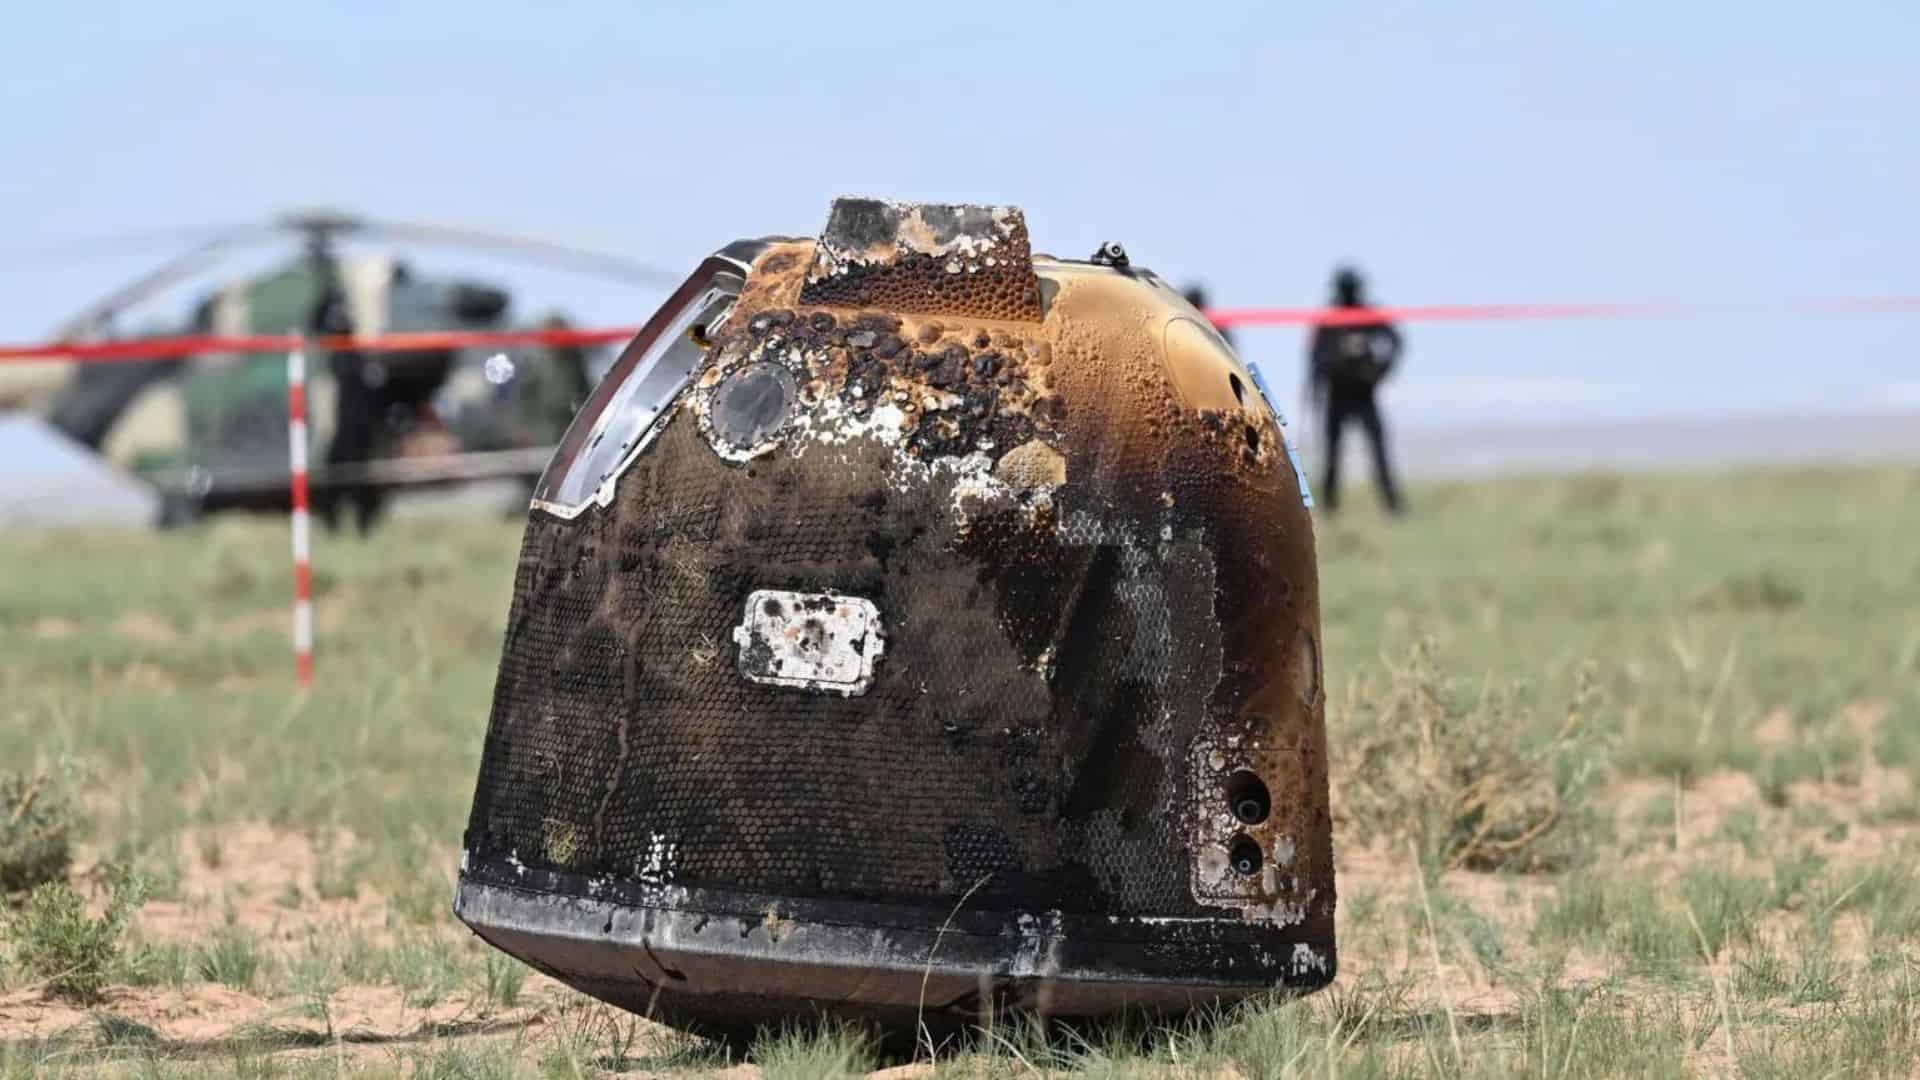 The re-entry module of the Chang'e 6 spacecraft landed in the Inner Mongolia desert with far side lunar samples on June 25, 2024